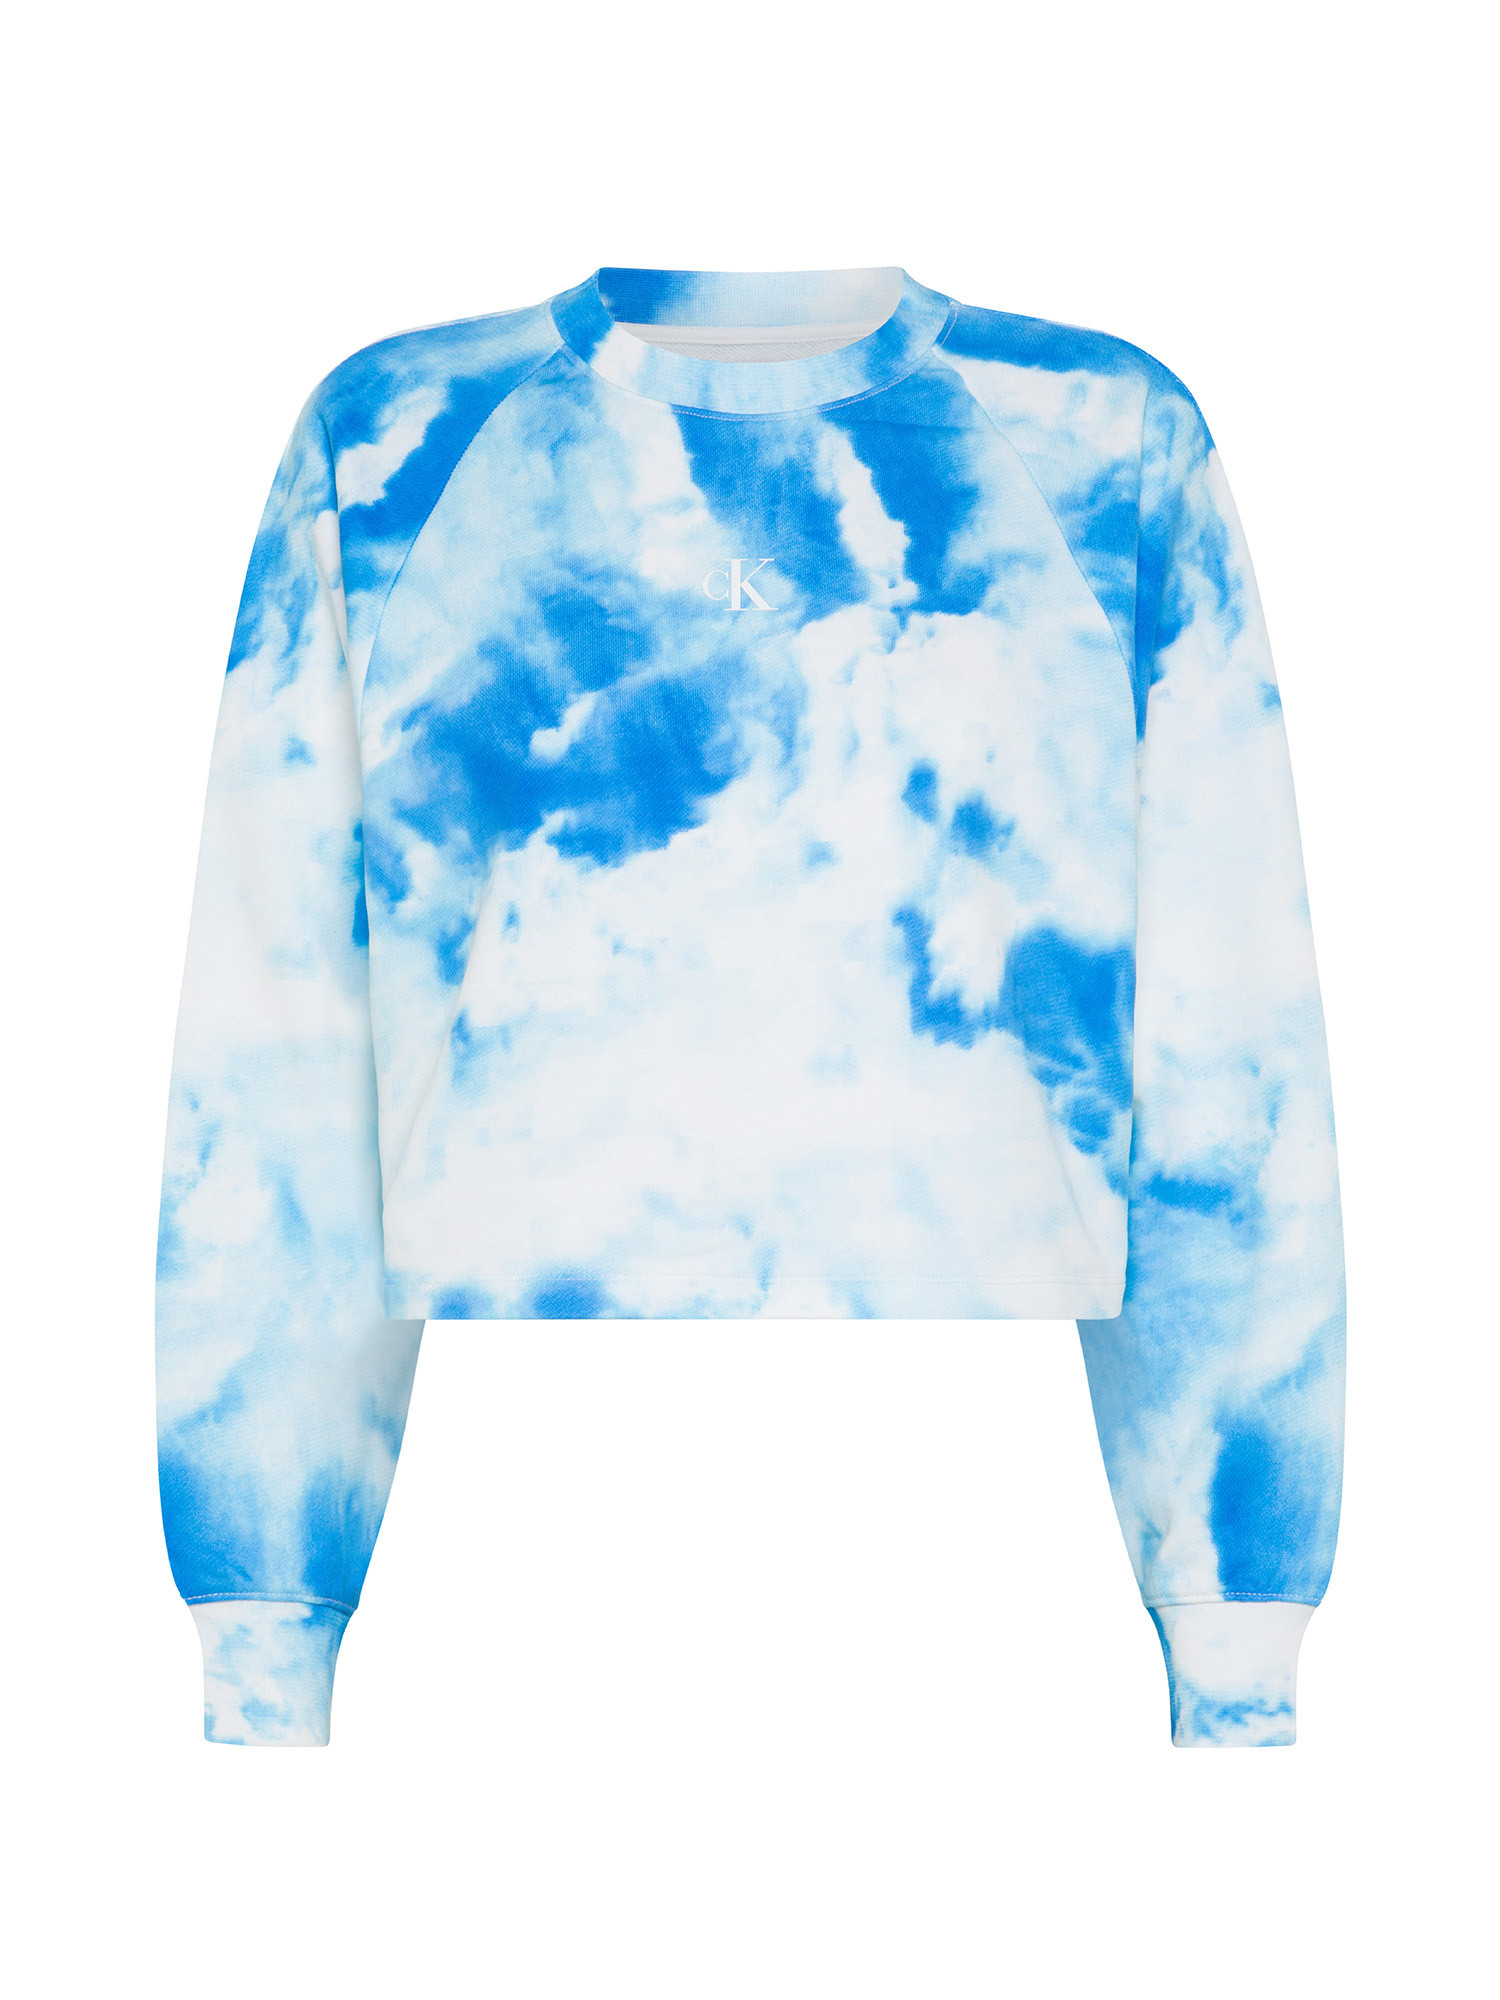 Sweatshirt with all-over print, Light Blue, large image number 0